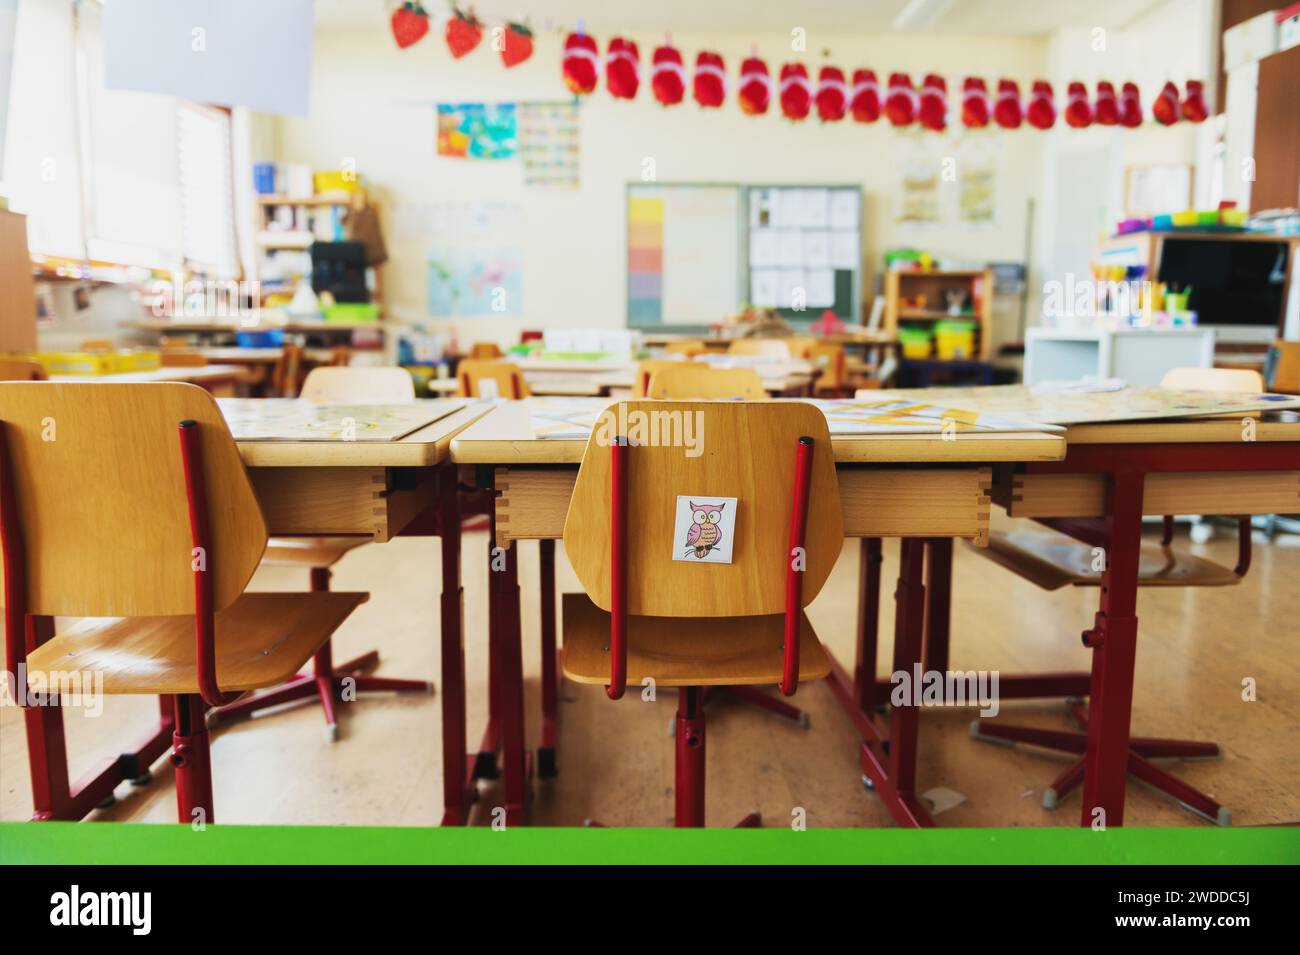 Elementary classroom, back to school concept Stock Photo